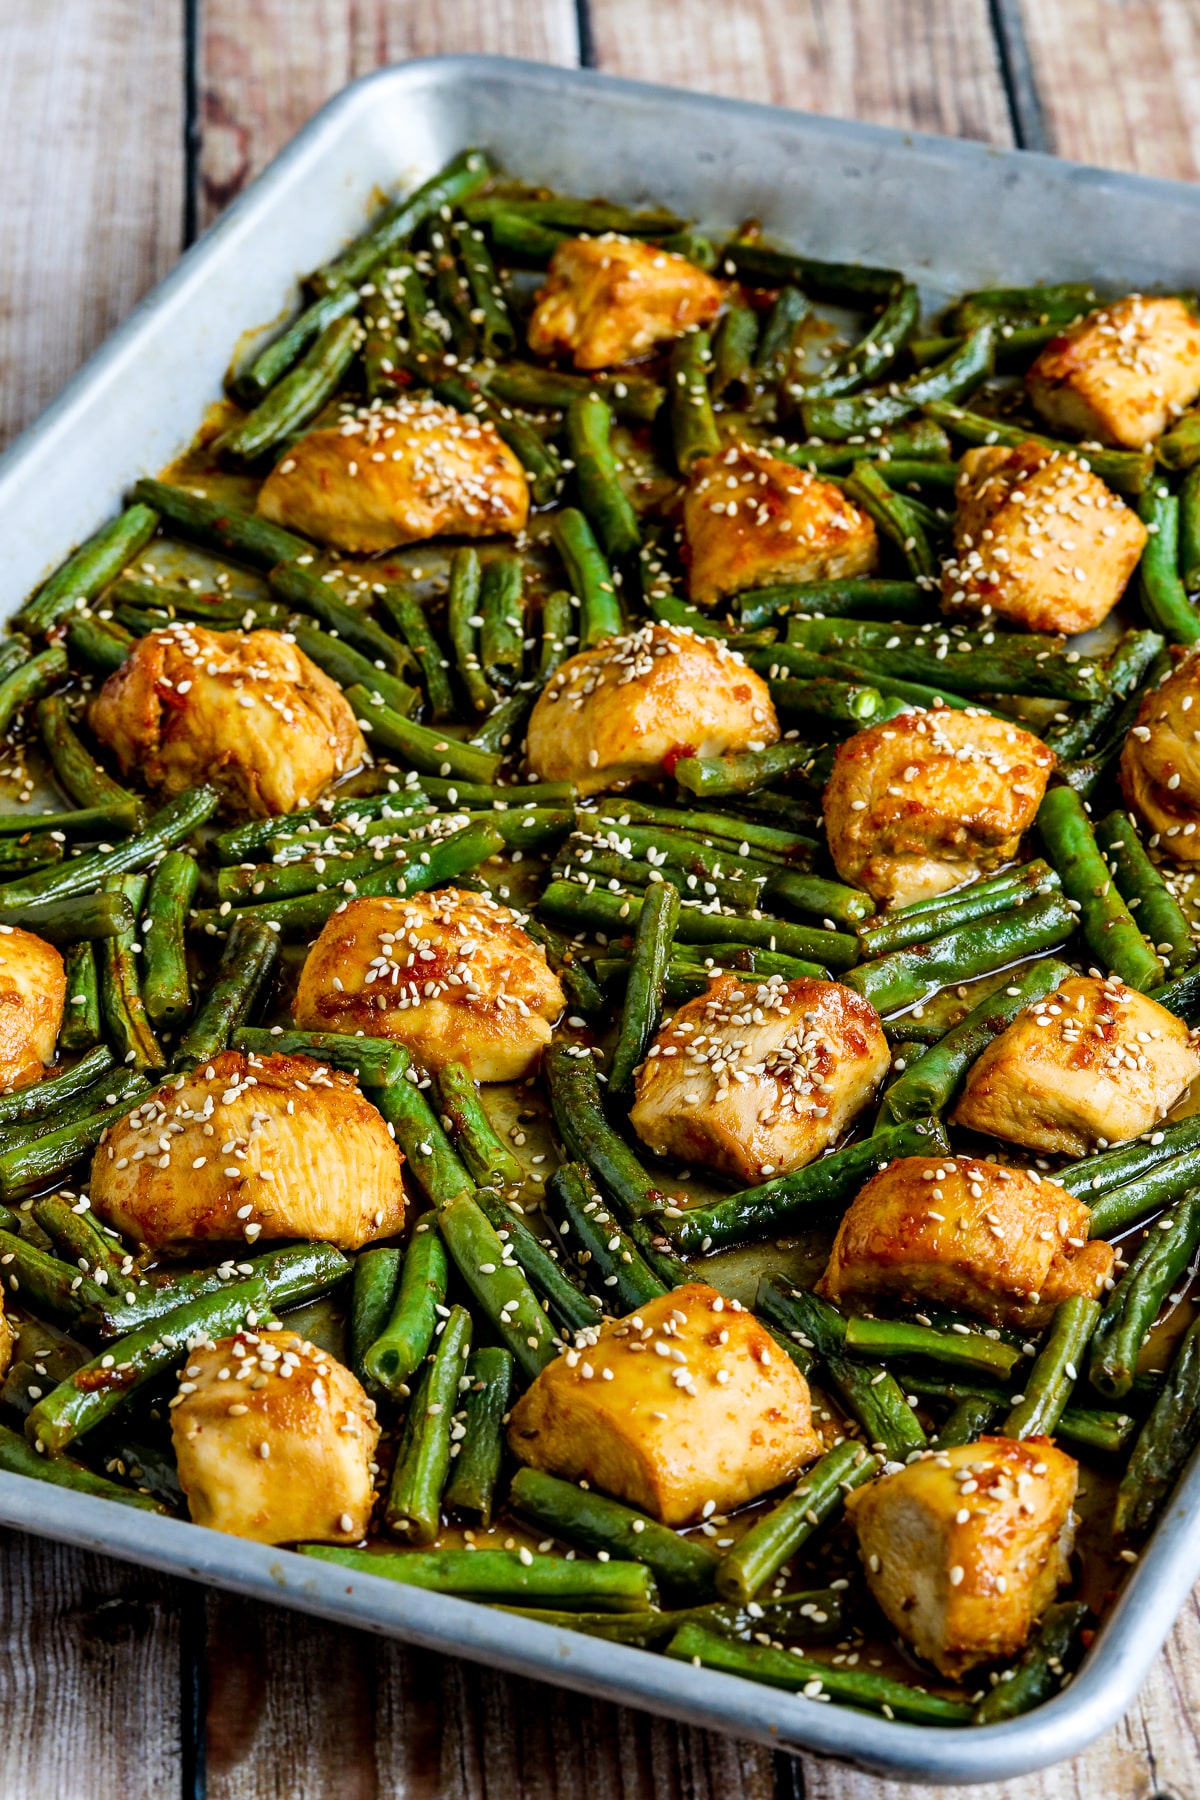 Asian Chicken and Green Beans Sheet Pan Meal Shown in Sheet Pan in Second Photo.